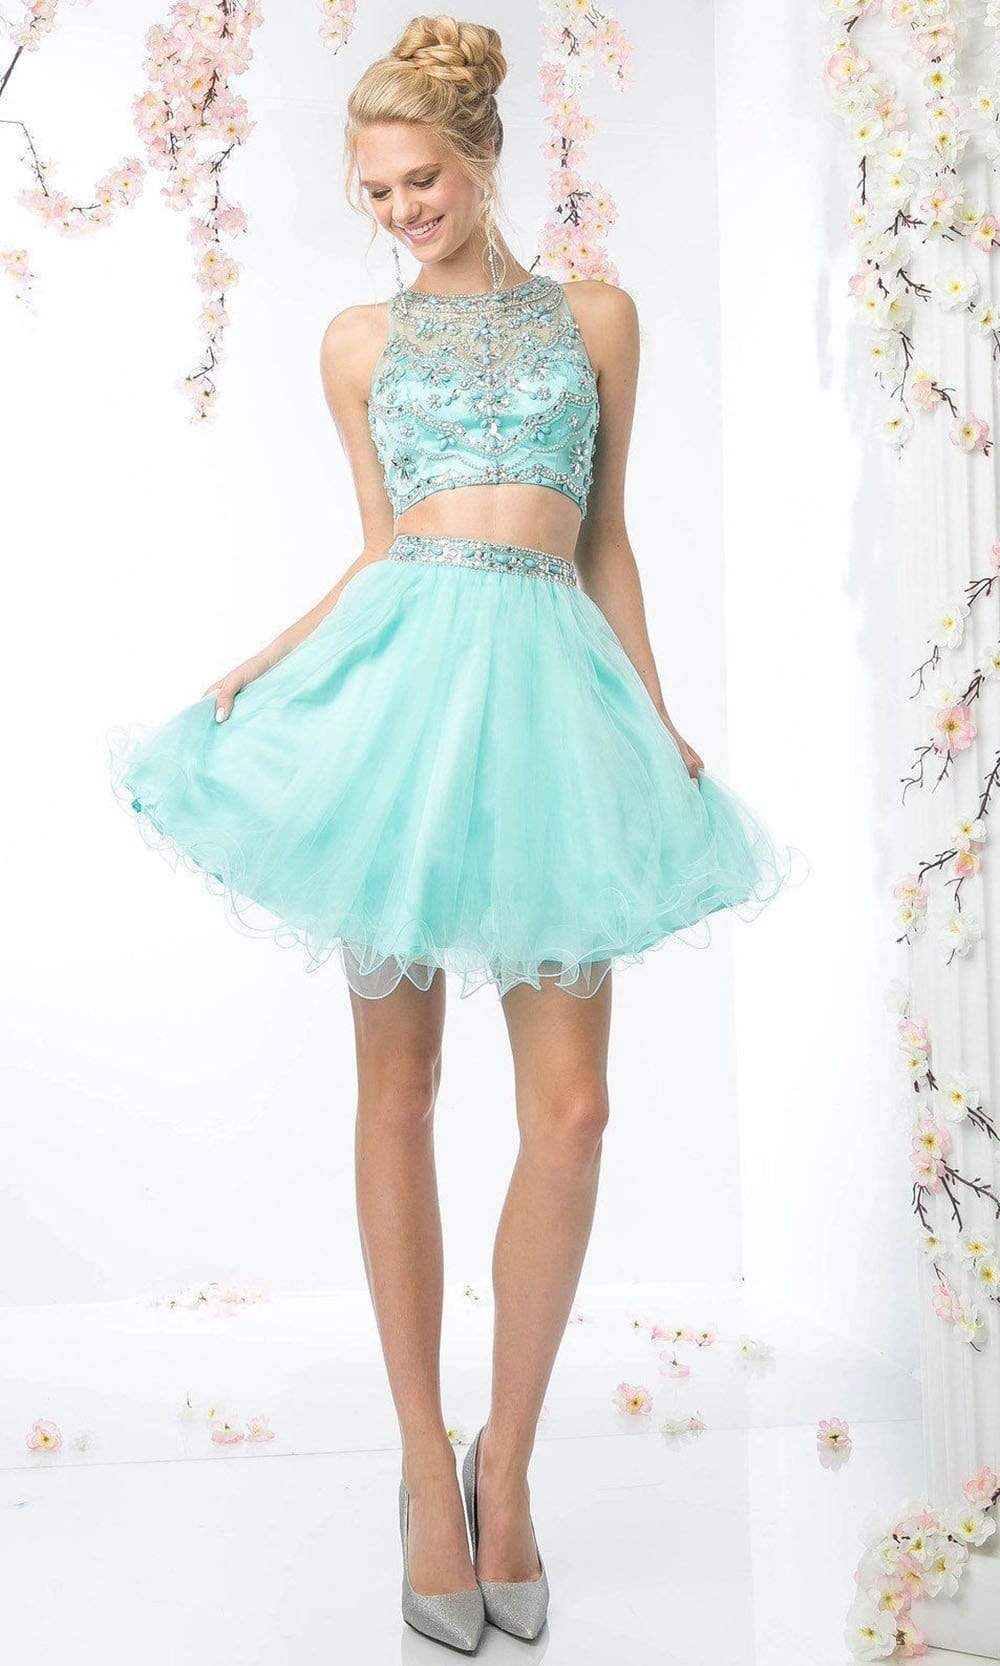 Cinderella Divine - Two-Piece Crystal Ornate Illusion A-Line Dress Special Occasion Dress 2 / Mint